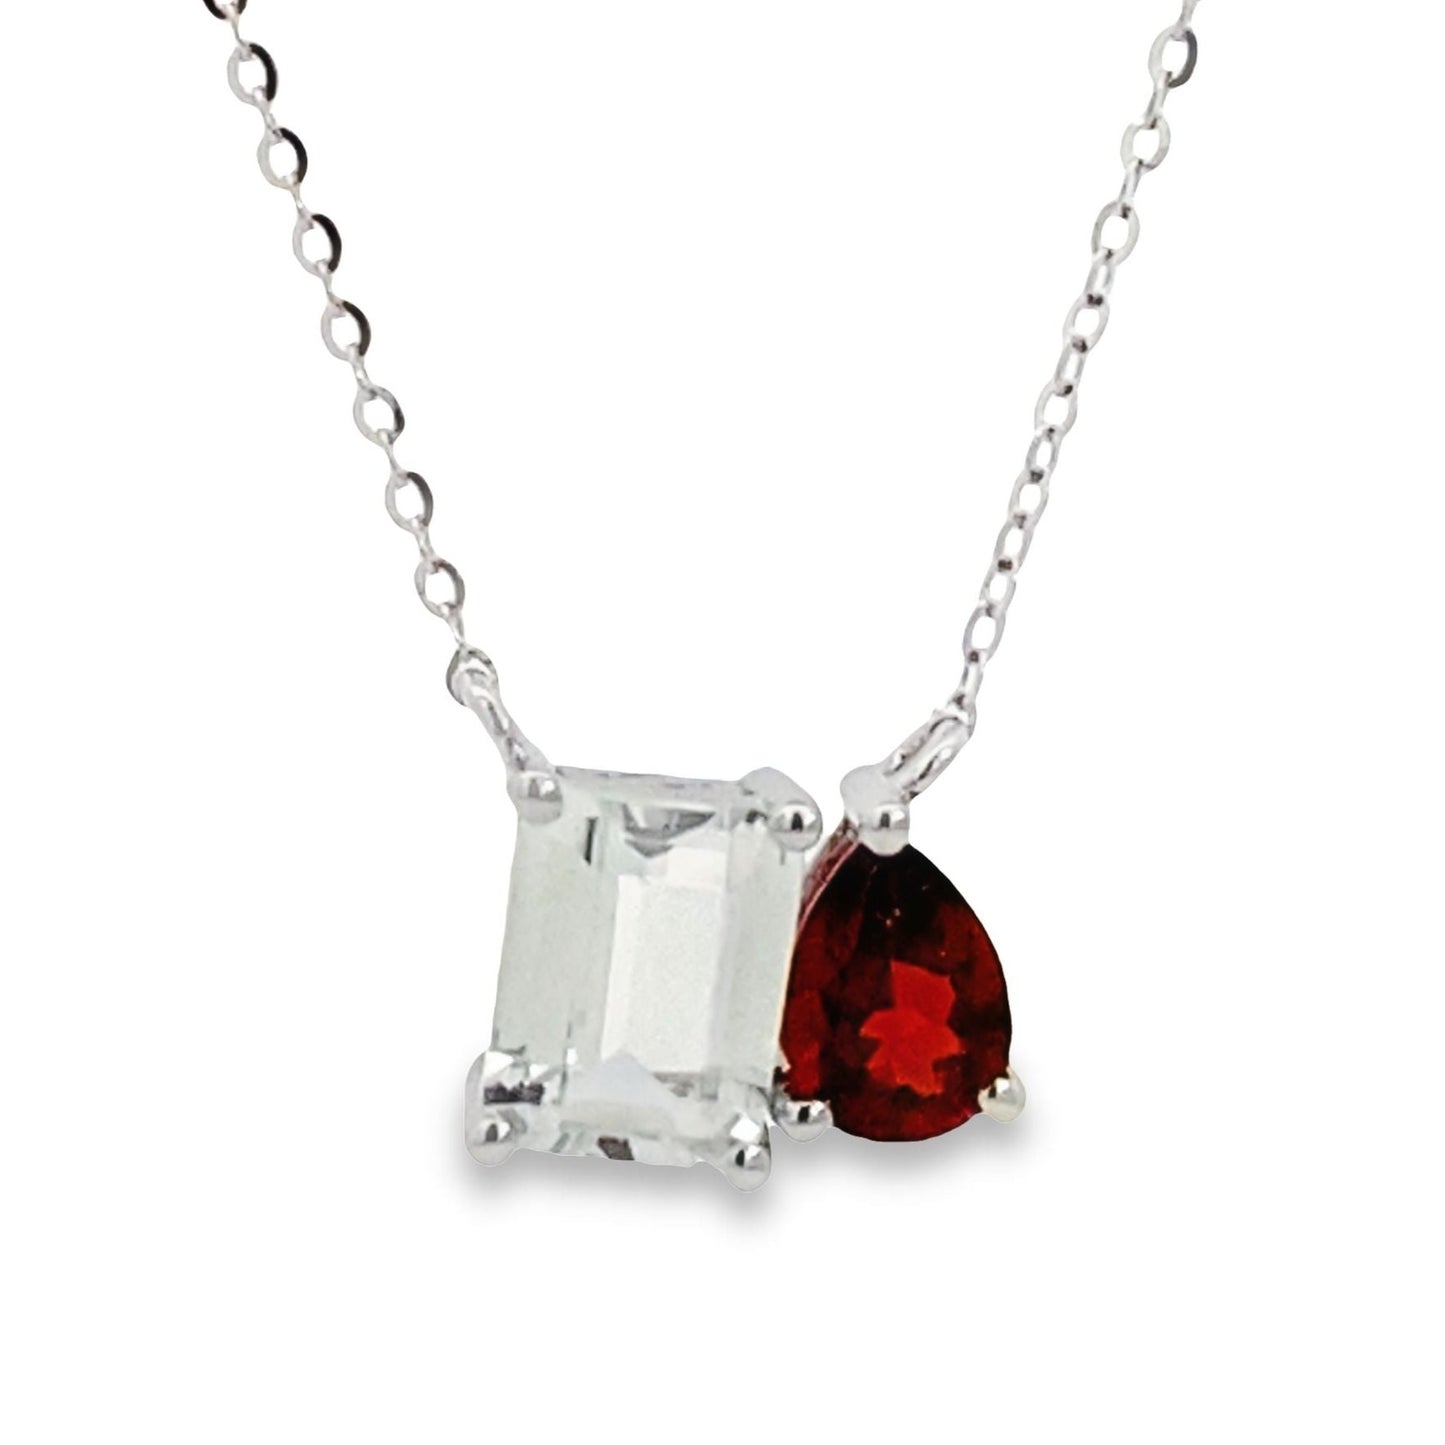 Luvente | Two-Stone Garnet and White Topaz Necklace